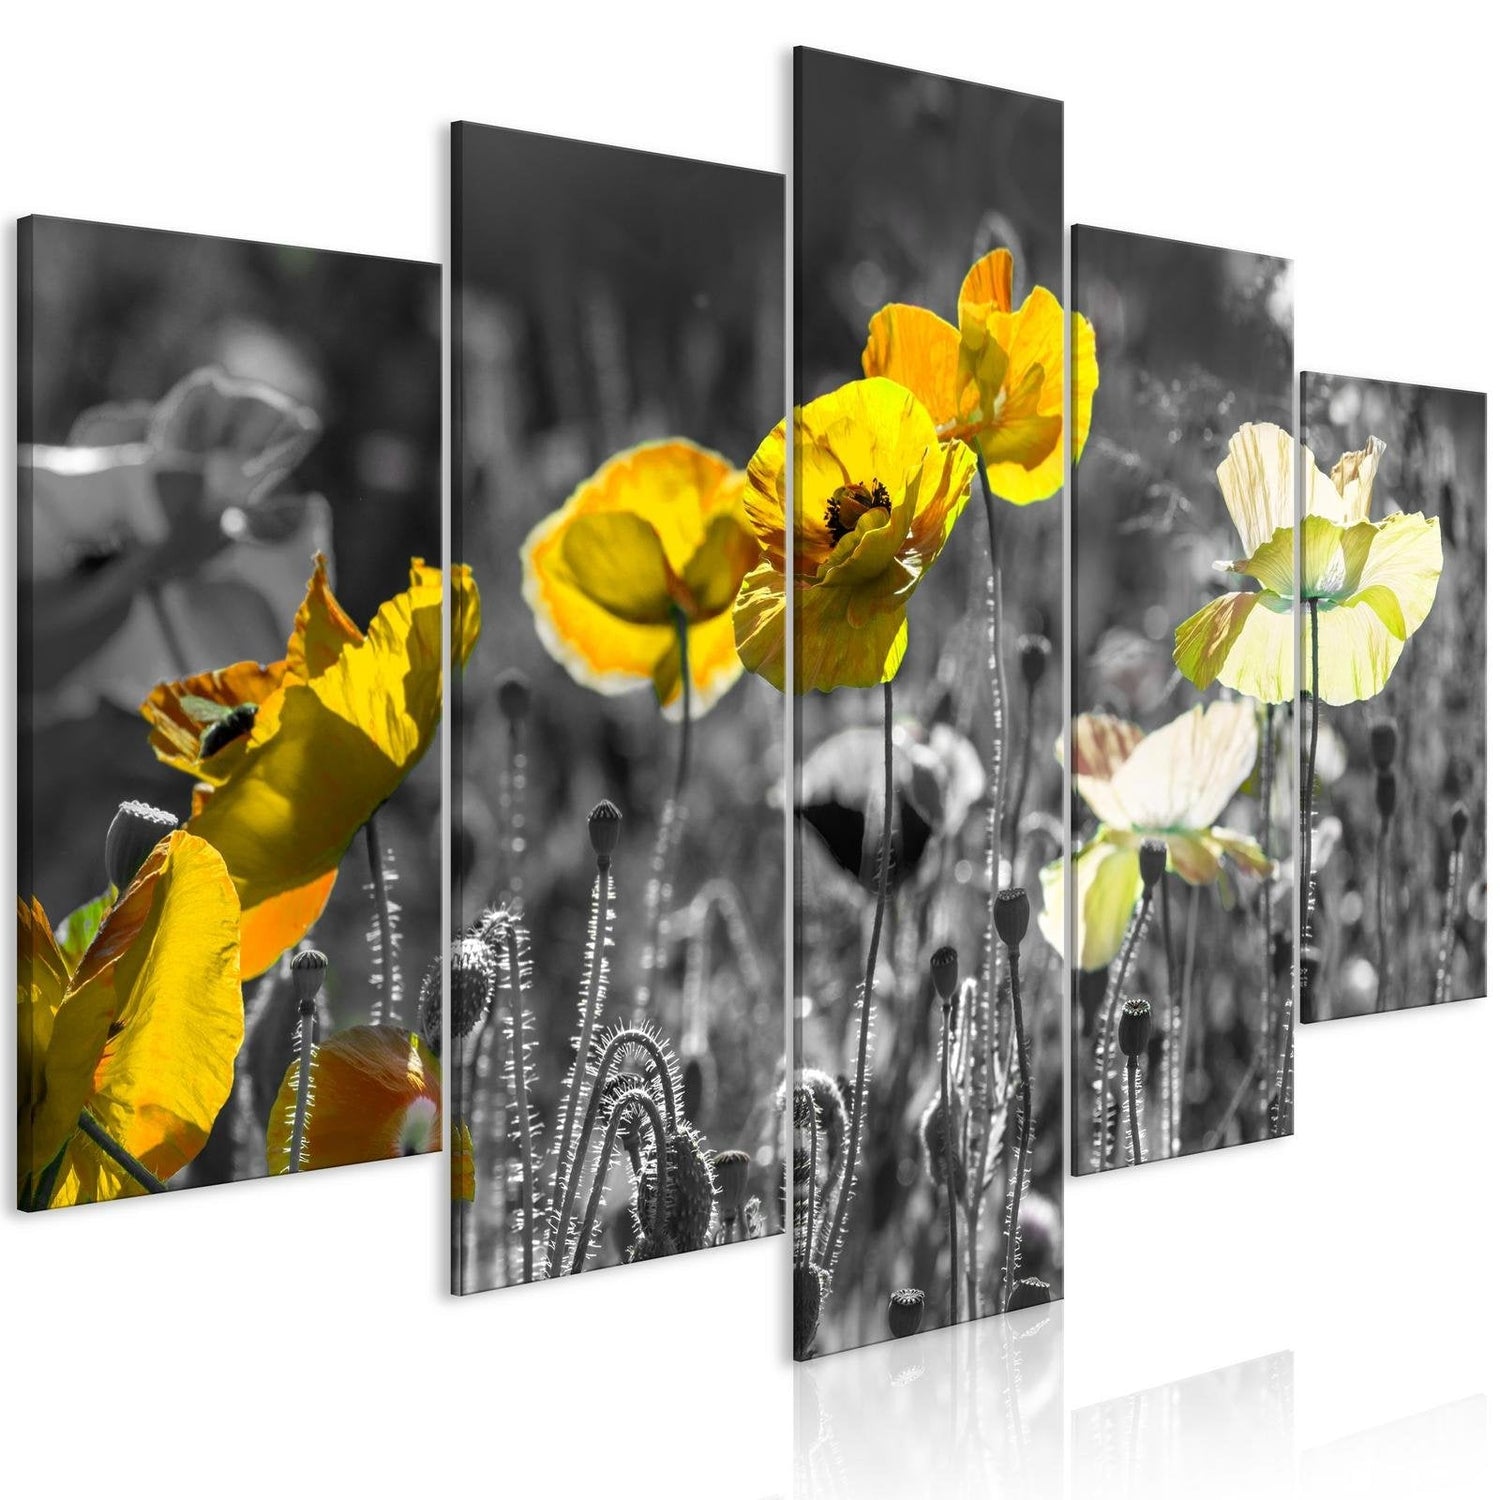 Stretched Canvas Floral Art - Yellow Poppies Wide-Tiptophomedecor